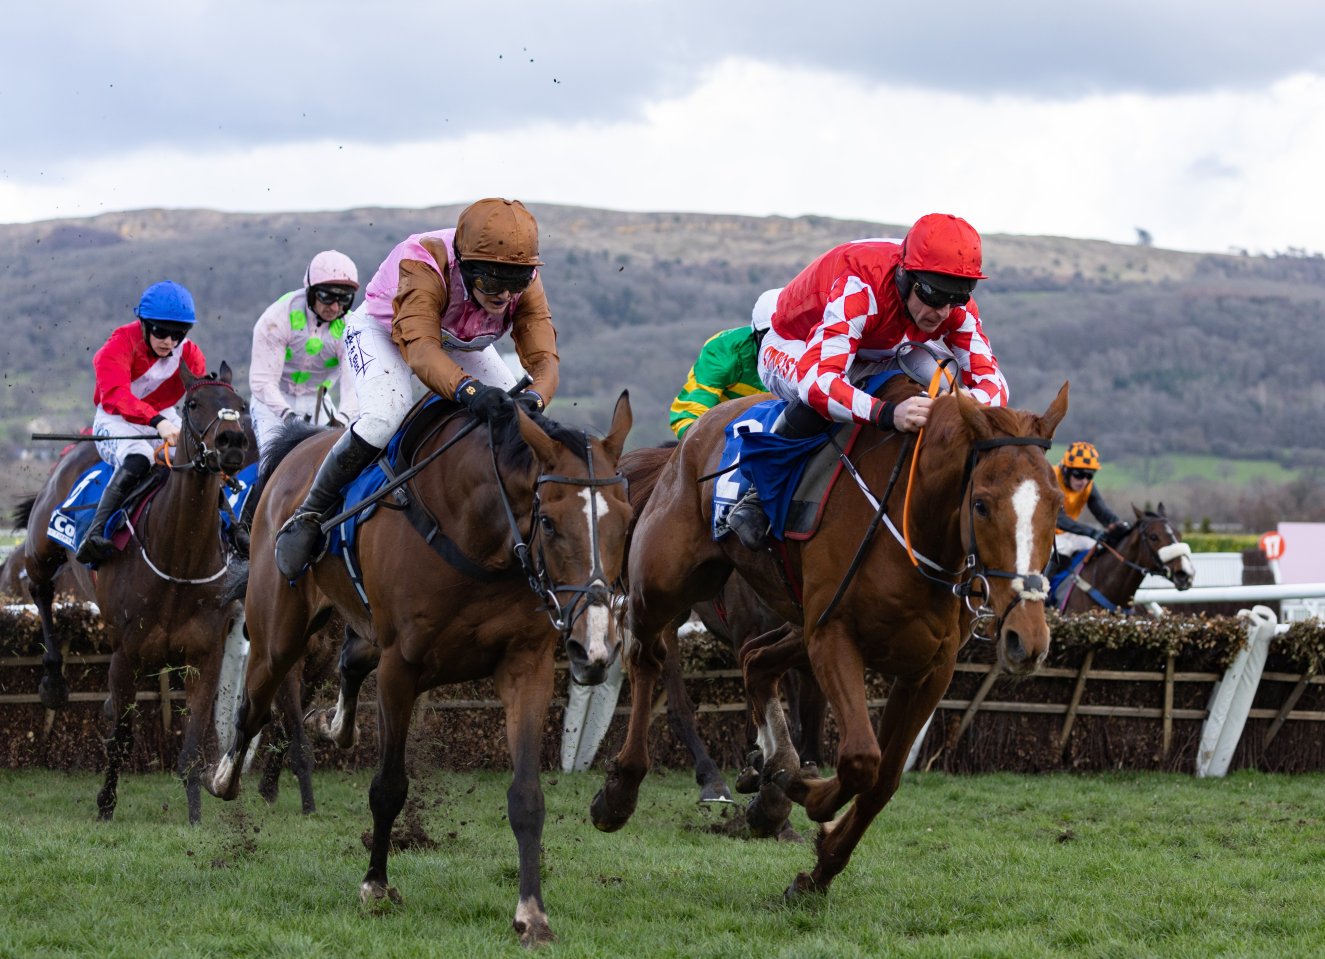 The Cheltenham Festival ticket and hospitality packages